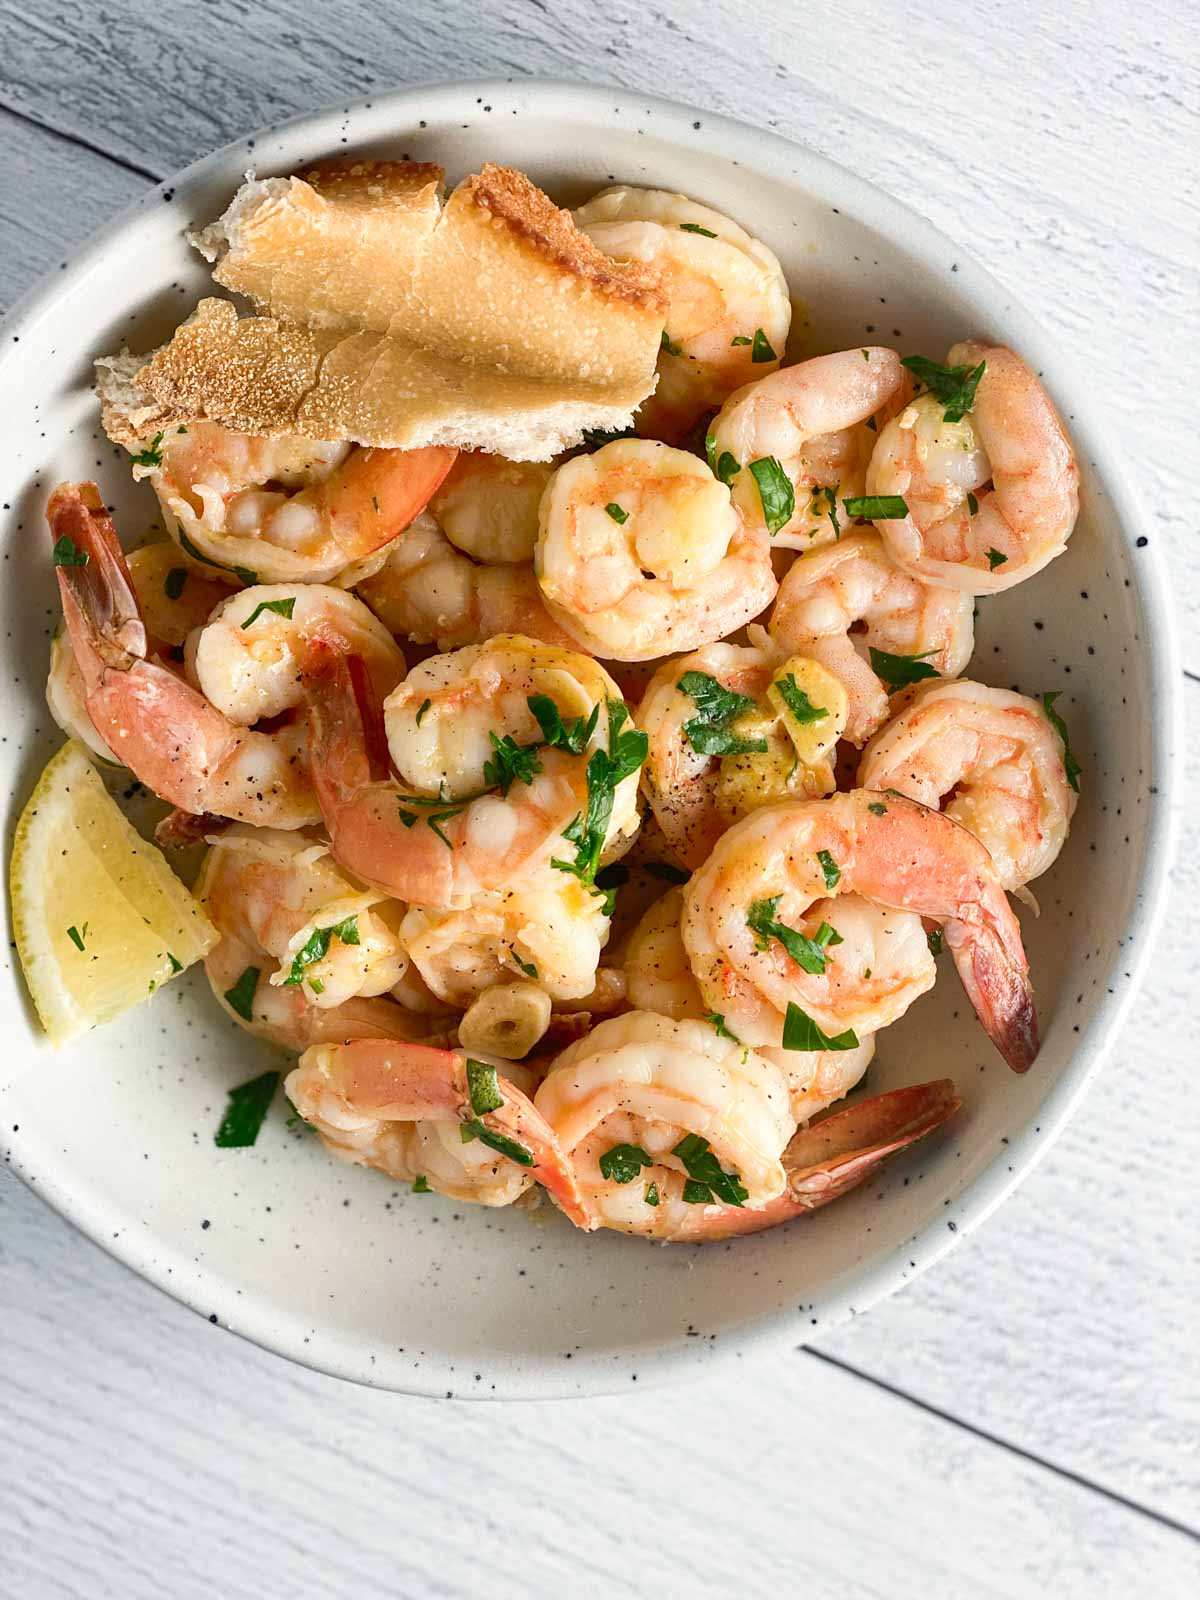 Shrimp Scampi Recipe - The Forked Spoon